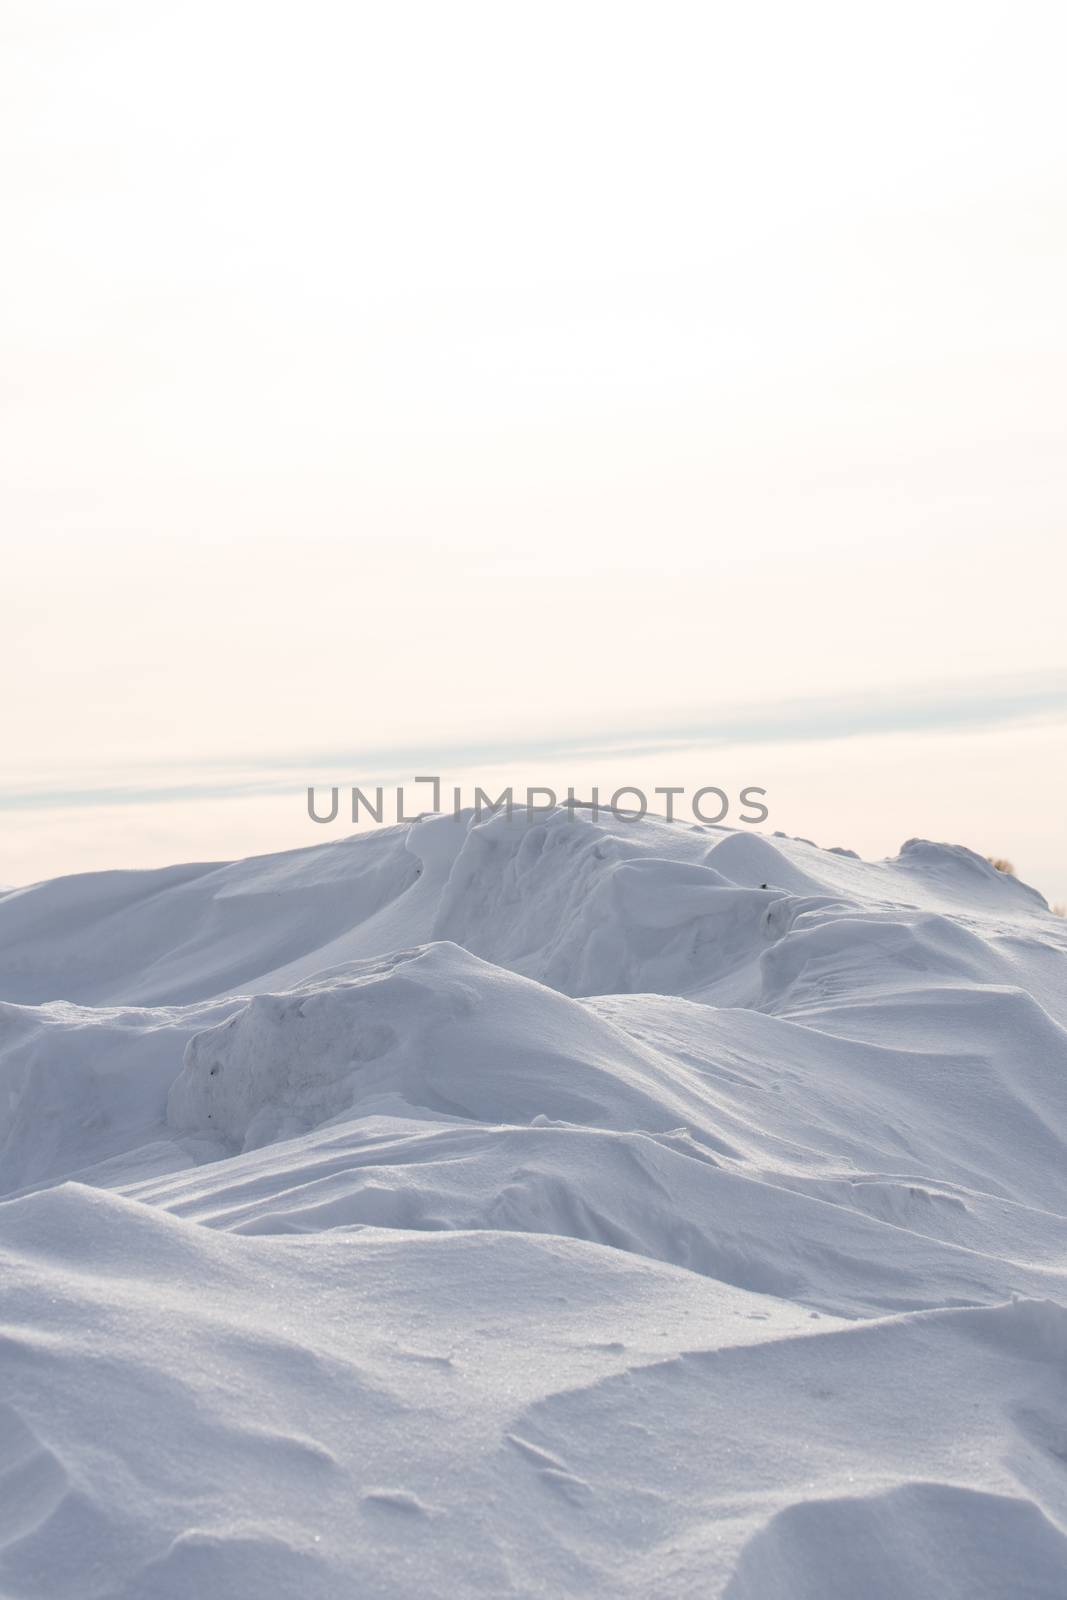 The snow isolated on white background, snow pile